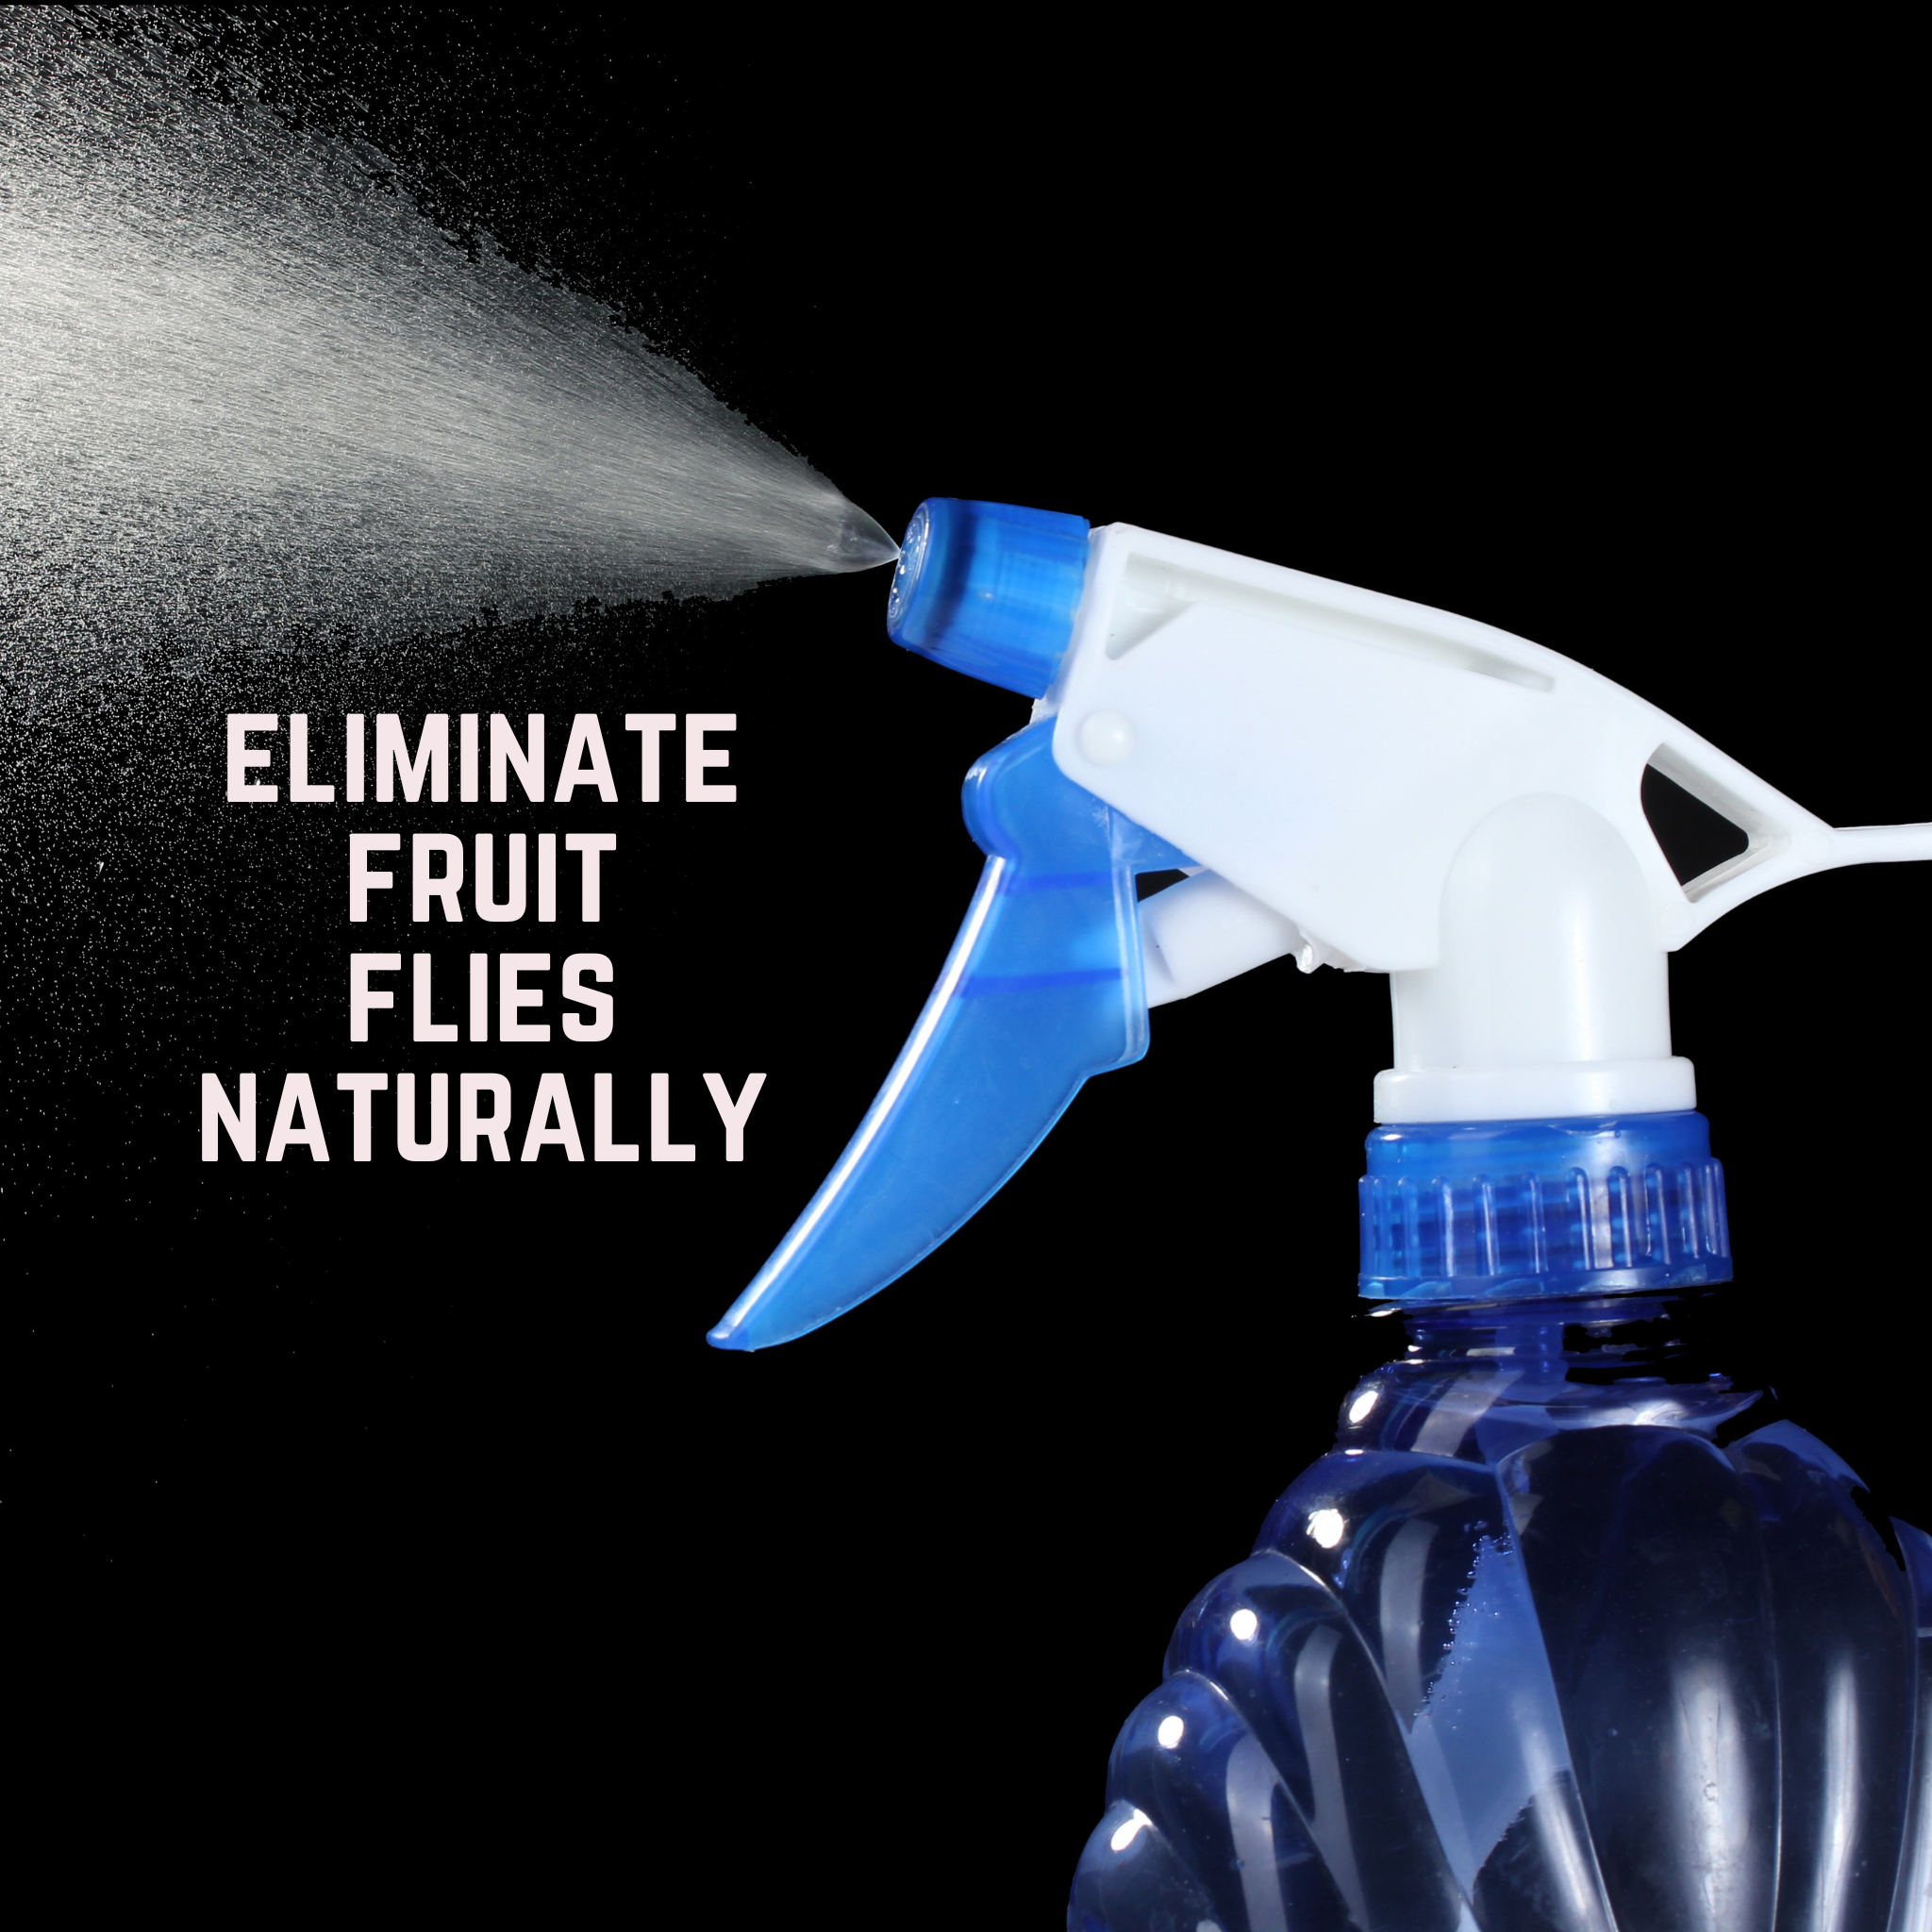 spray bottle with natural spray for eliminating fruit flies